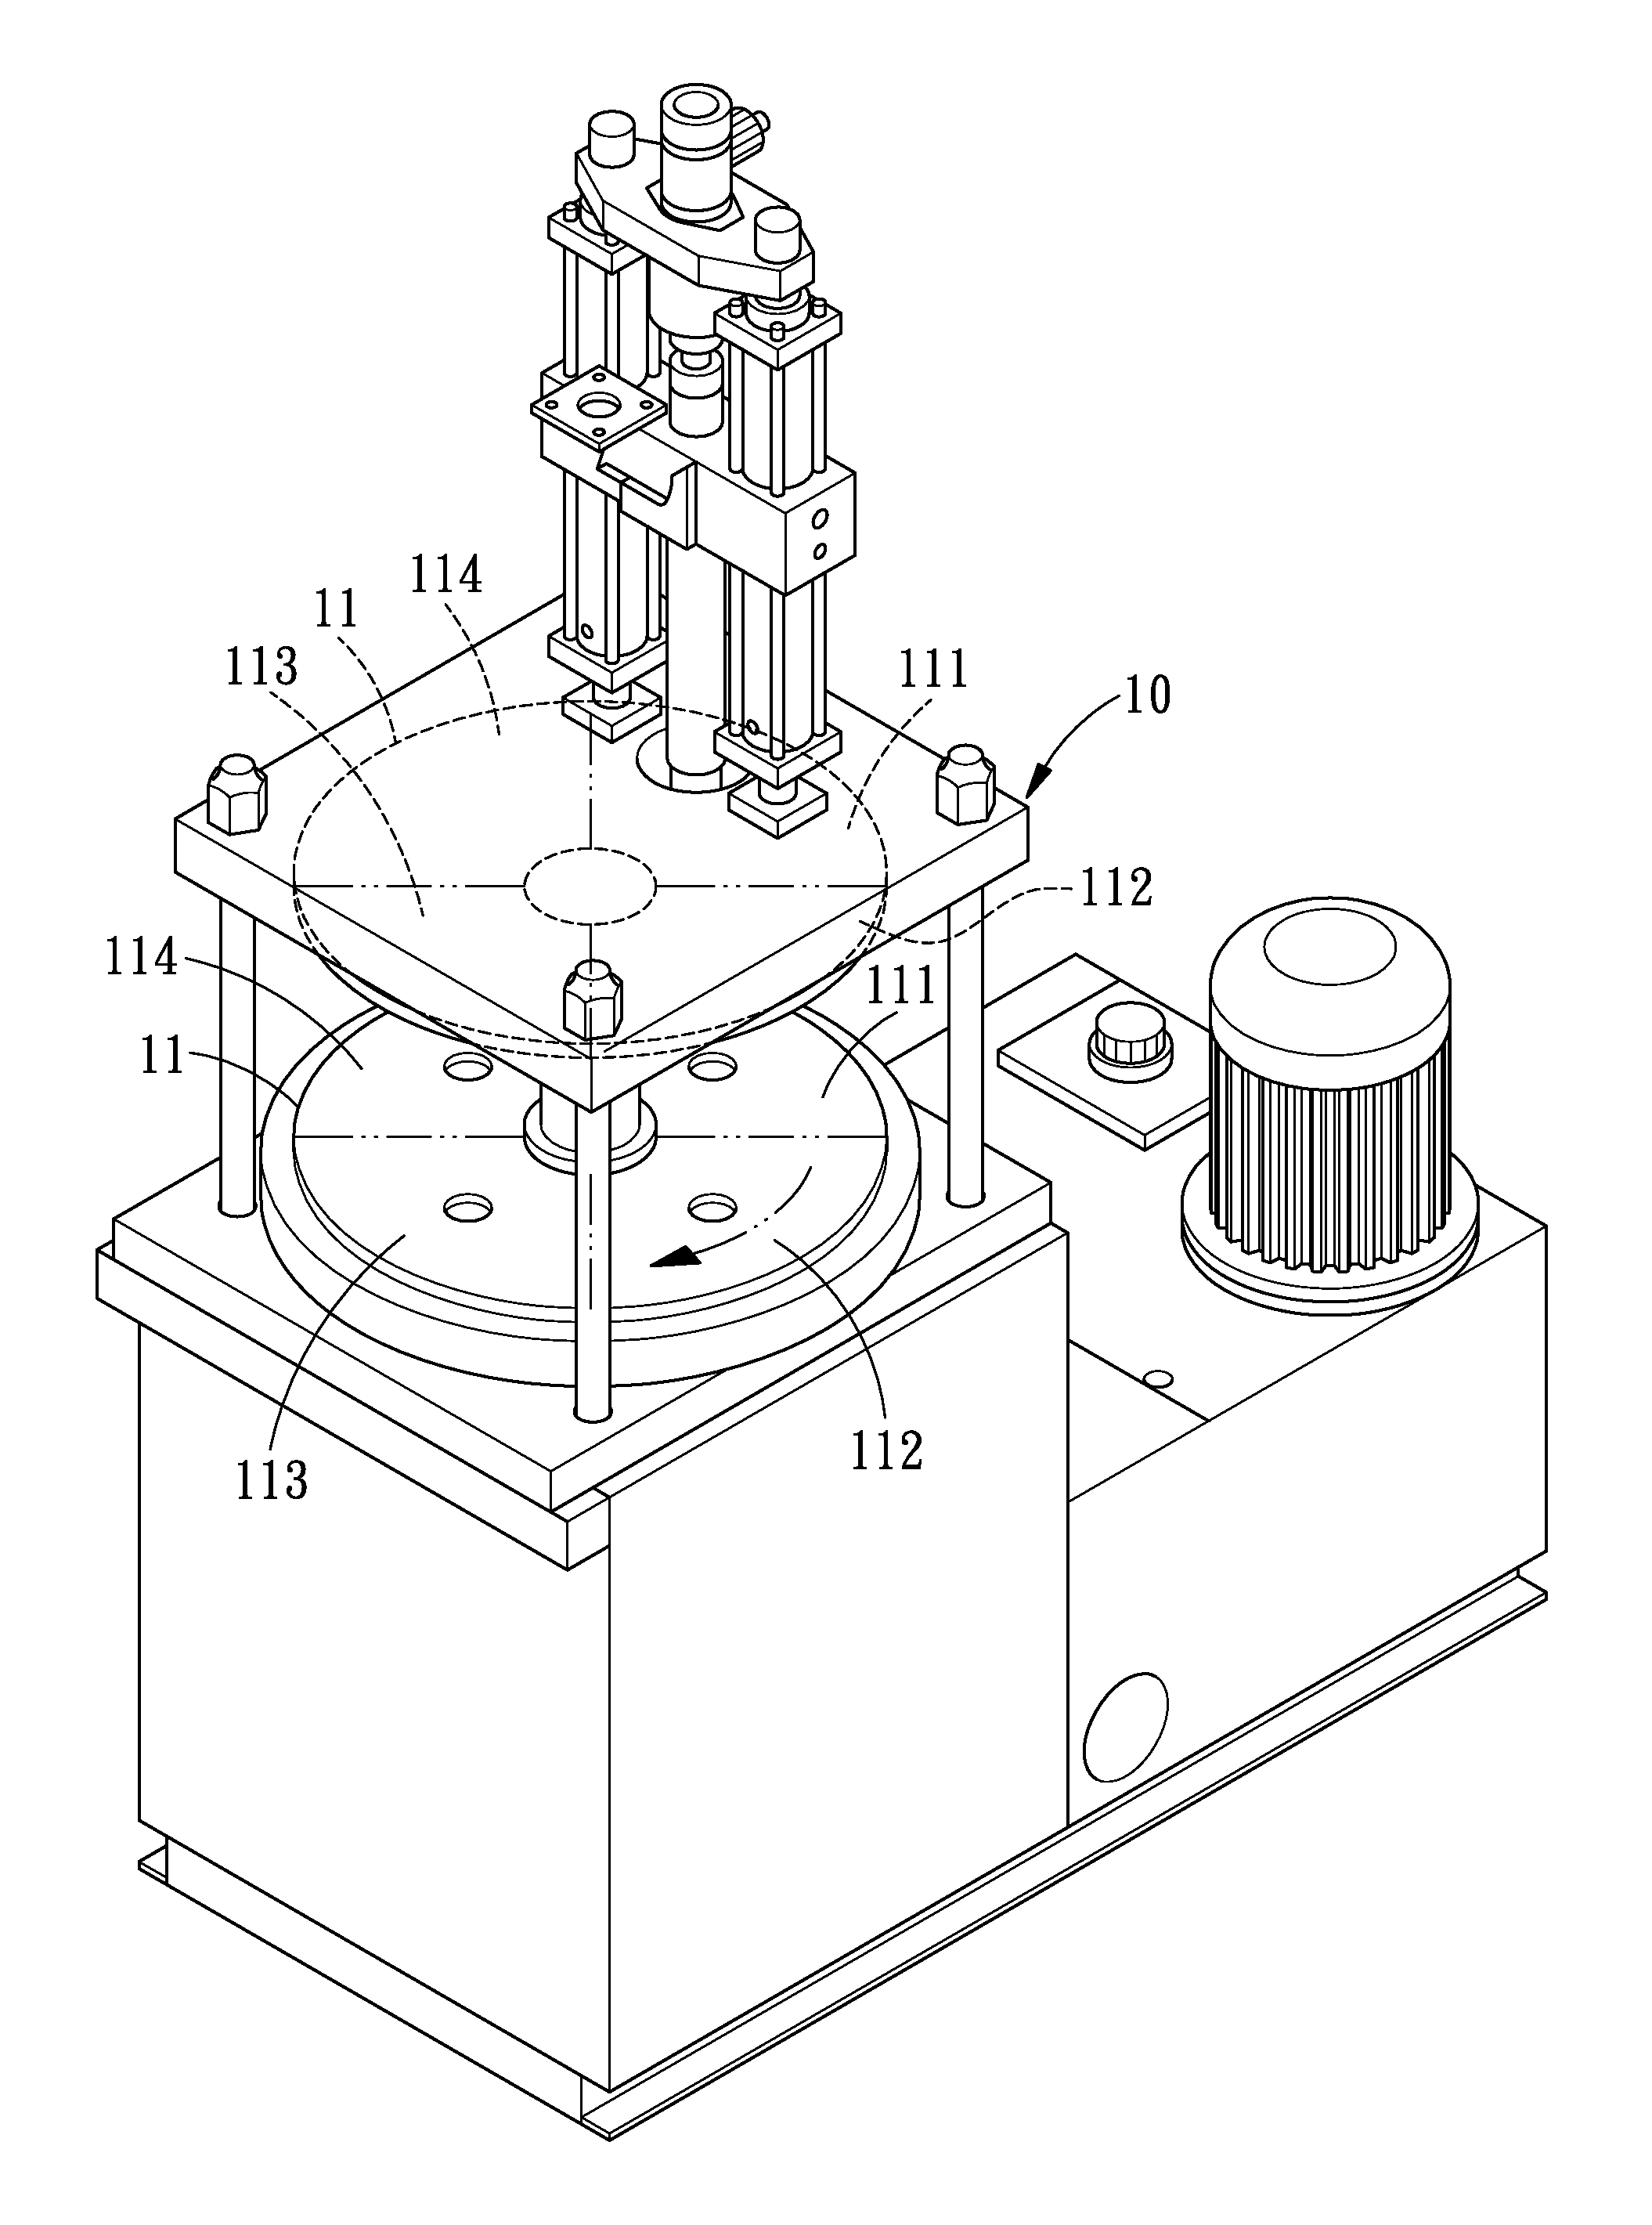 Processing method for in-mold coating integrative system